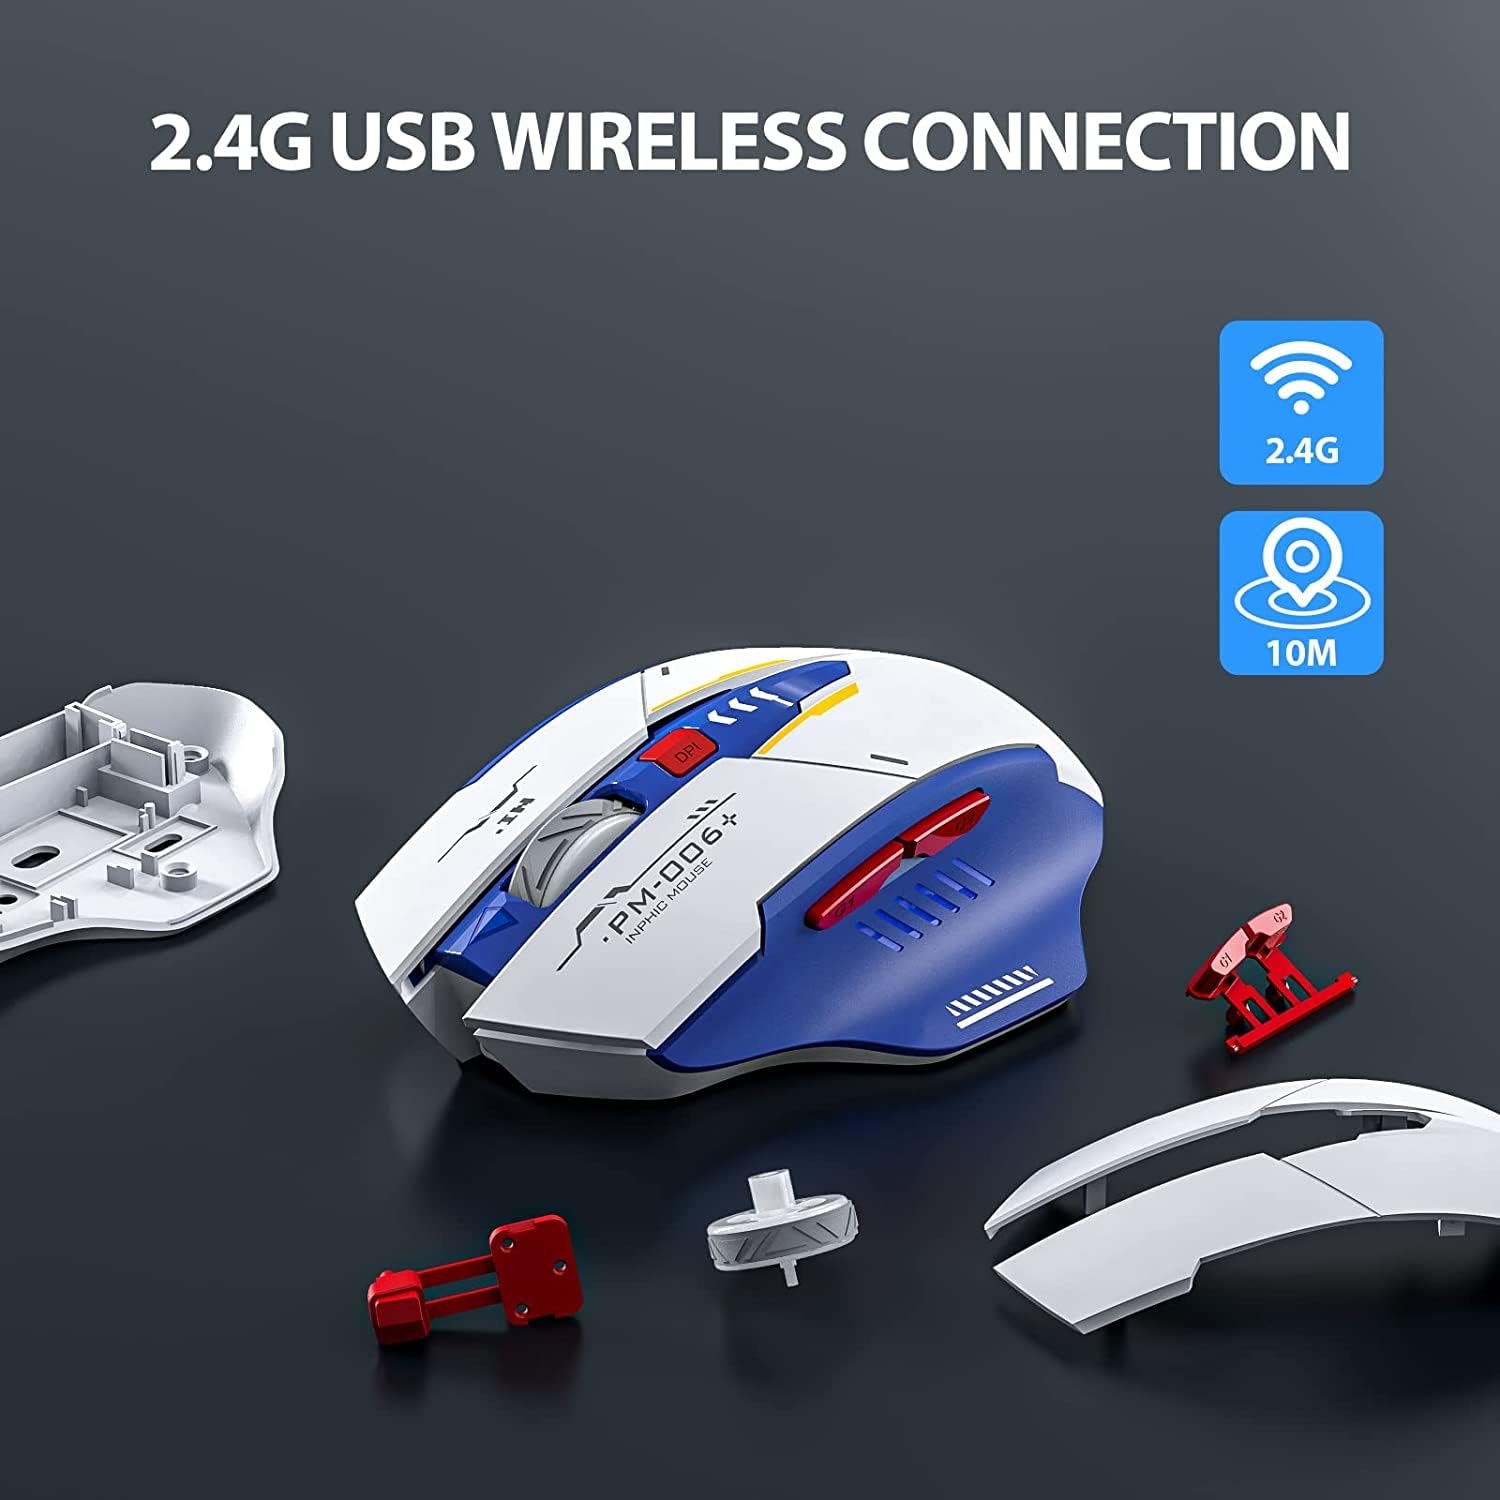 GameXtrem Wireless Mouse, Rechargeable Ergonomic Silent Mice with 2.4G USB Receiver Mecha Style Mouse Wireless for Laptop Computer Mac MacBook, Blue & White